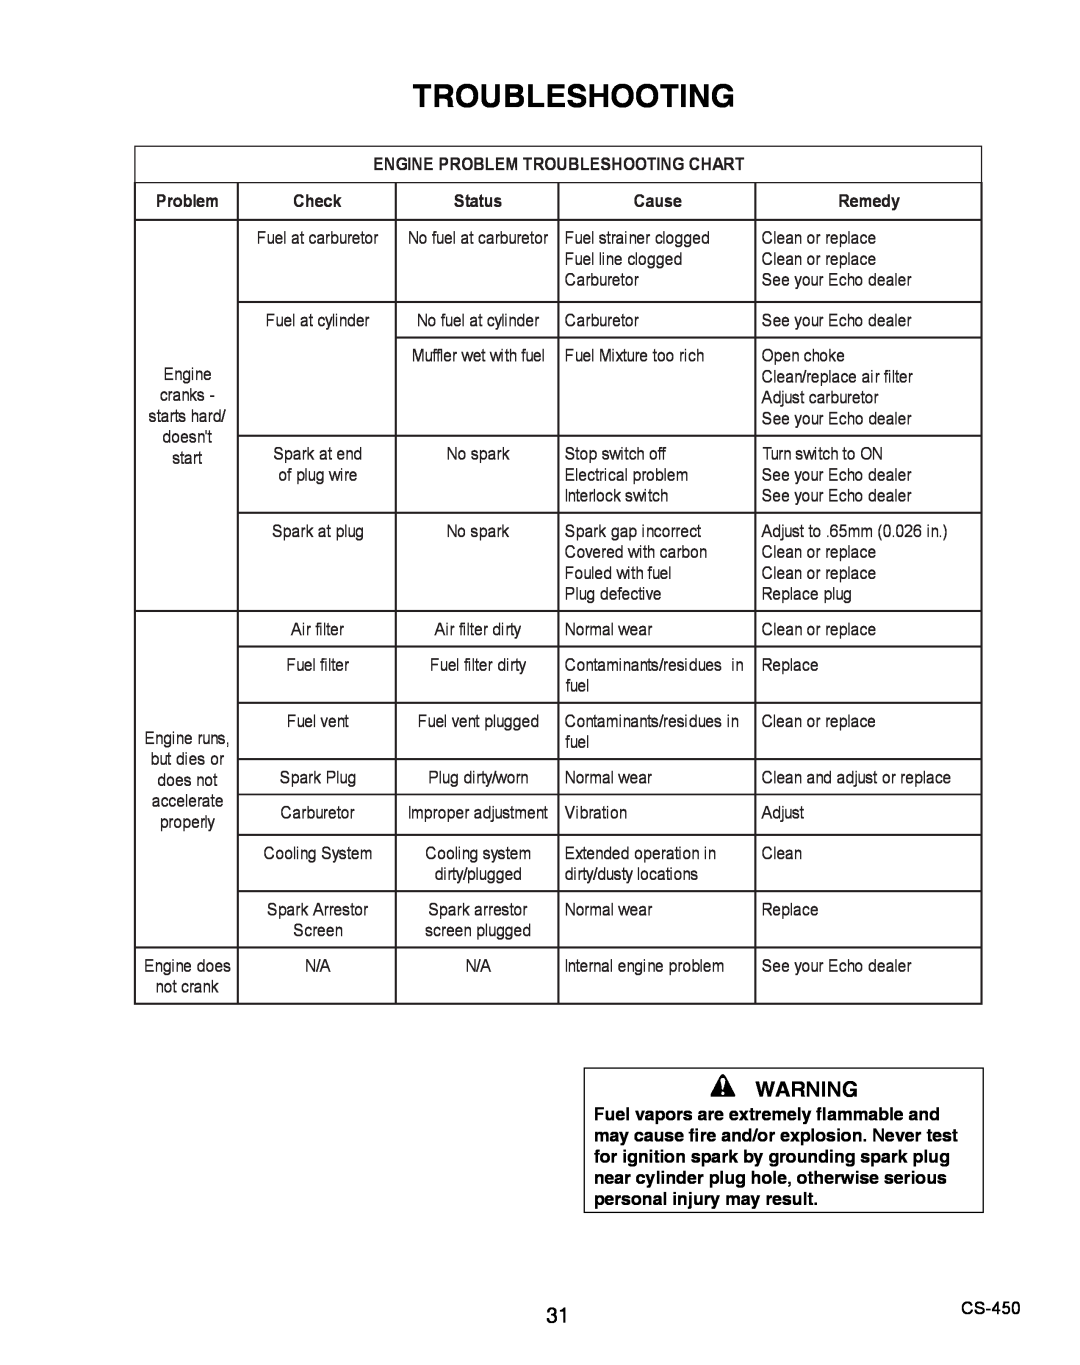 Echo X750010904, X7503196704 Troubleshooting, EnginE PrOBLEM TrOUBLESHOOTing CHarT, Problem, Check, Status, Cause, remedy 